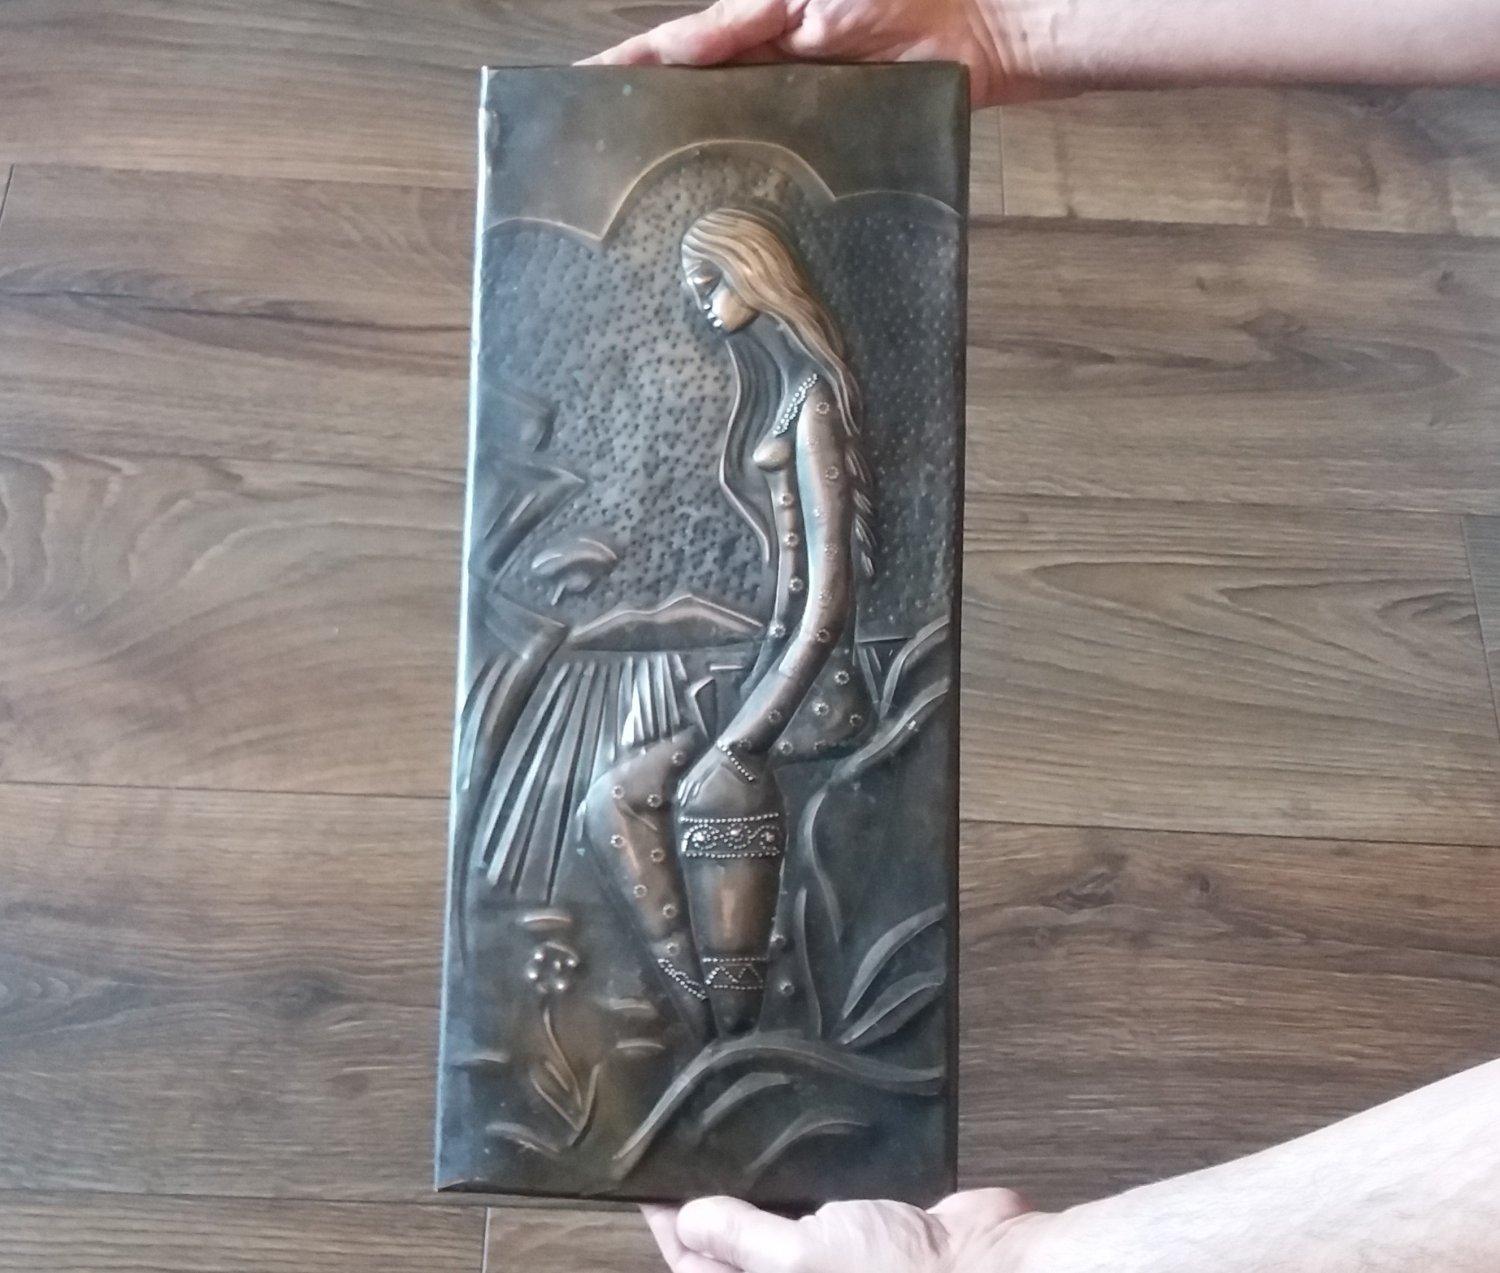 Vintage Embossed Copper Wall Decoration of an Armenian woman with a Water Jar, Armenian Chekanka